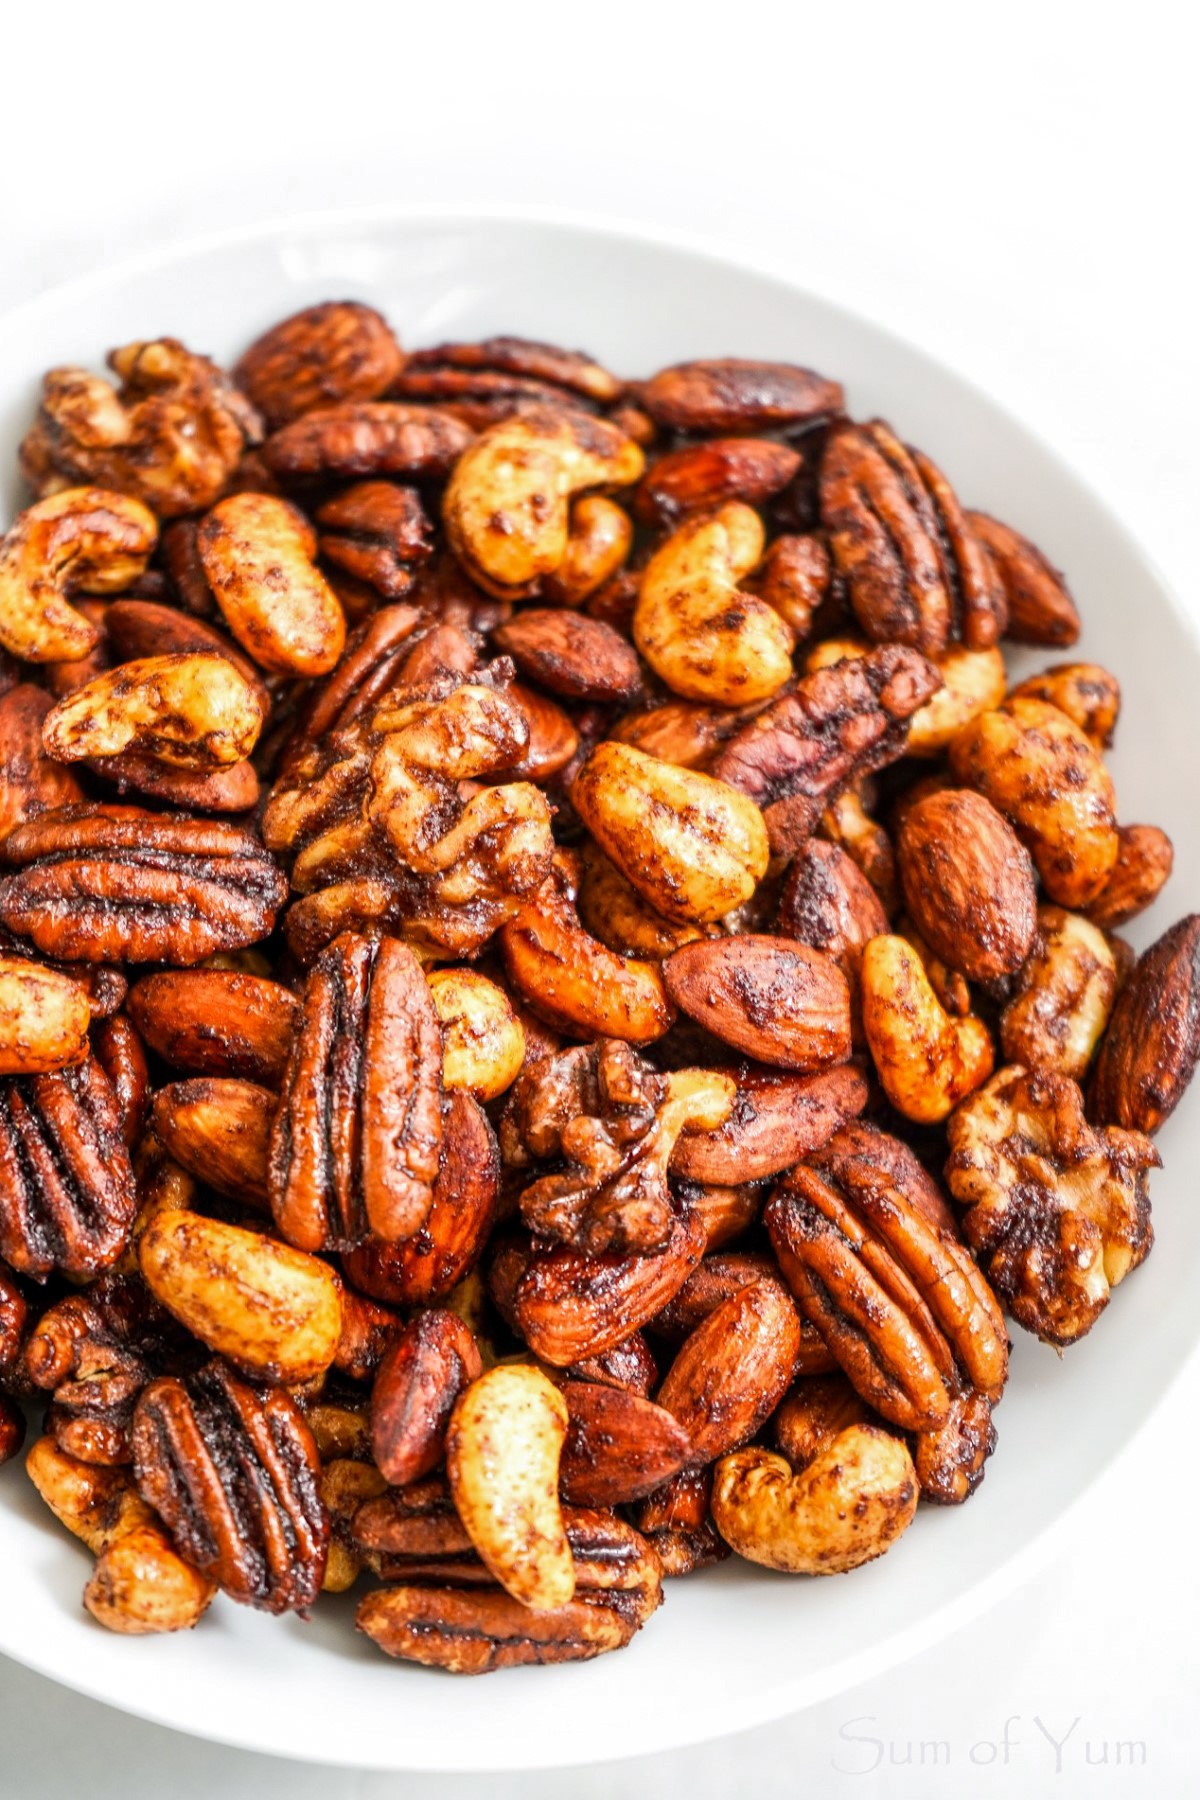 Spiced Rum Roasted Nuts